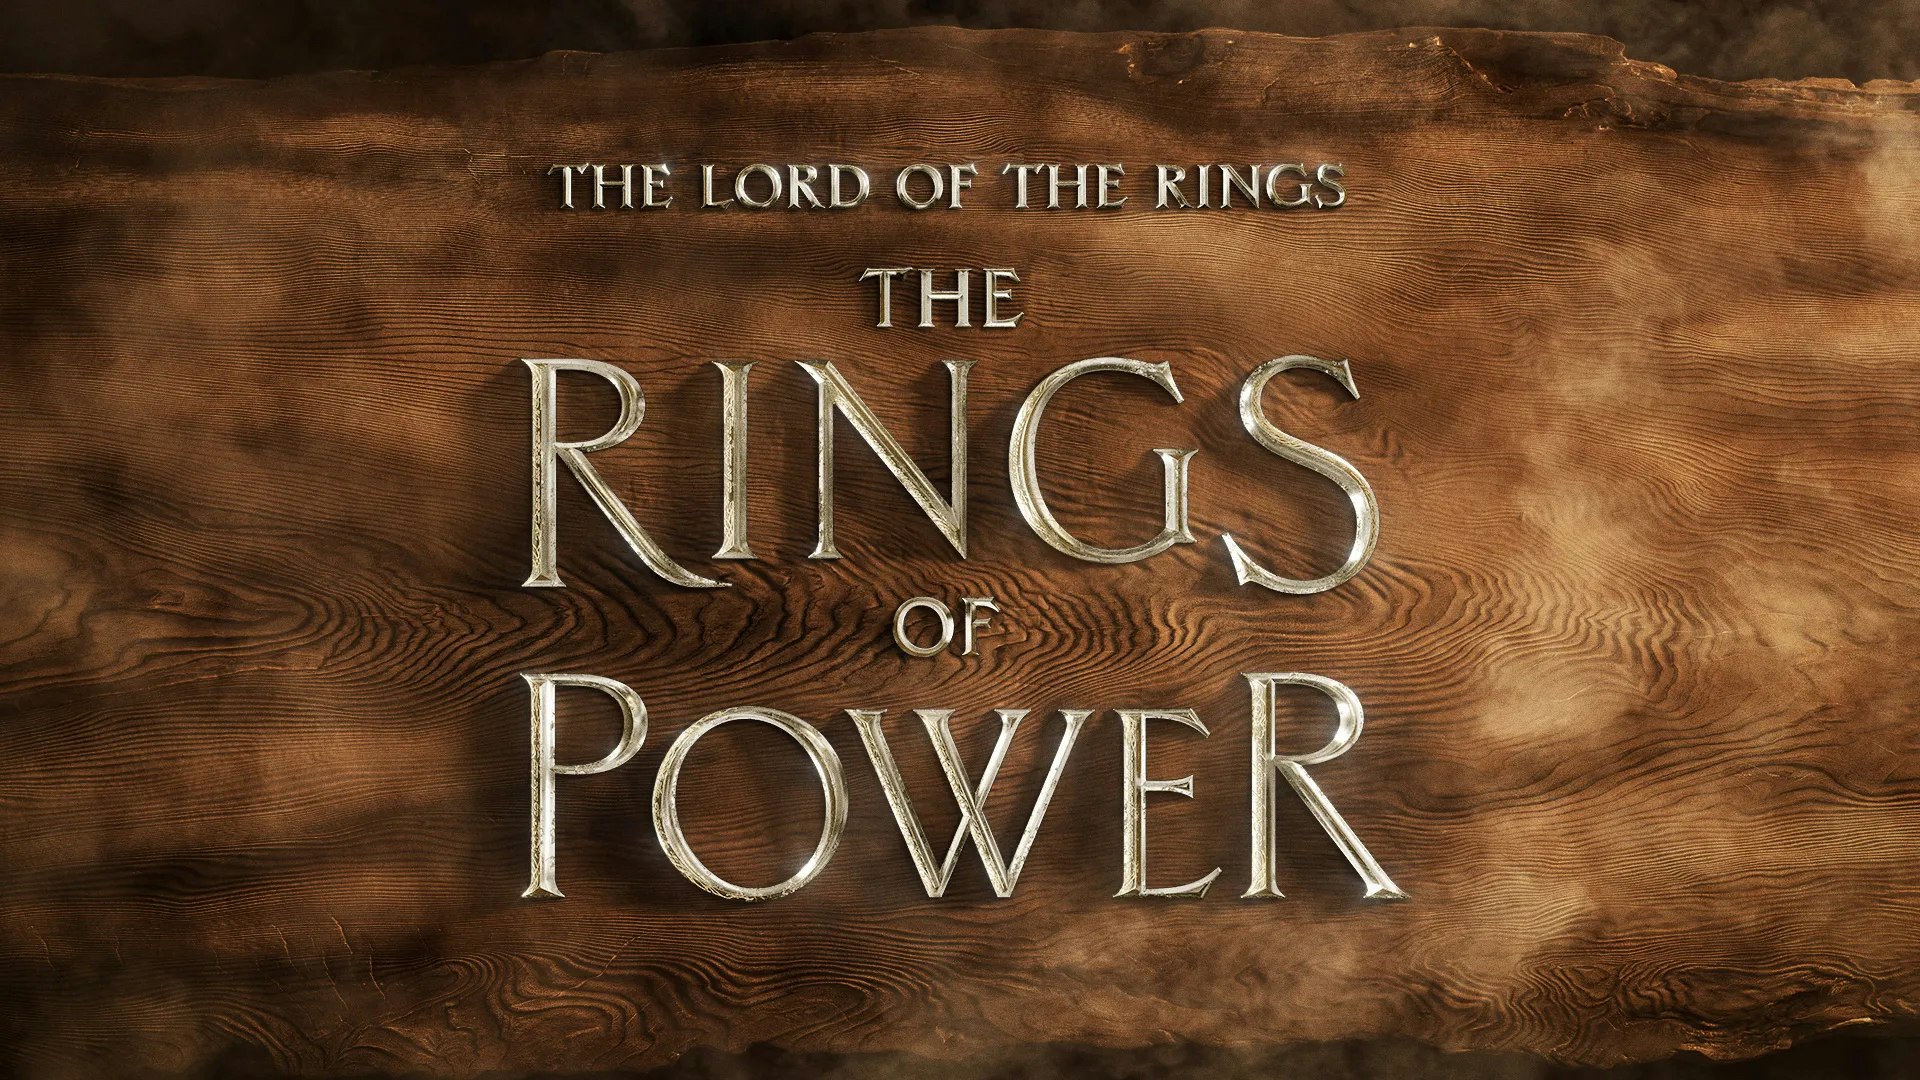 Lord of the Rings  prequel series: How to watch, cast